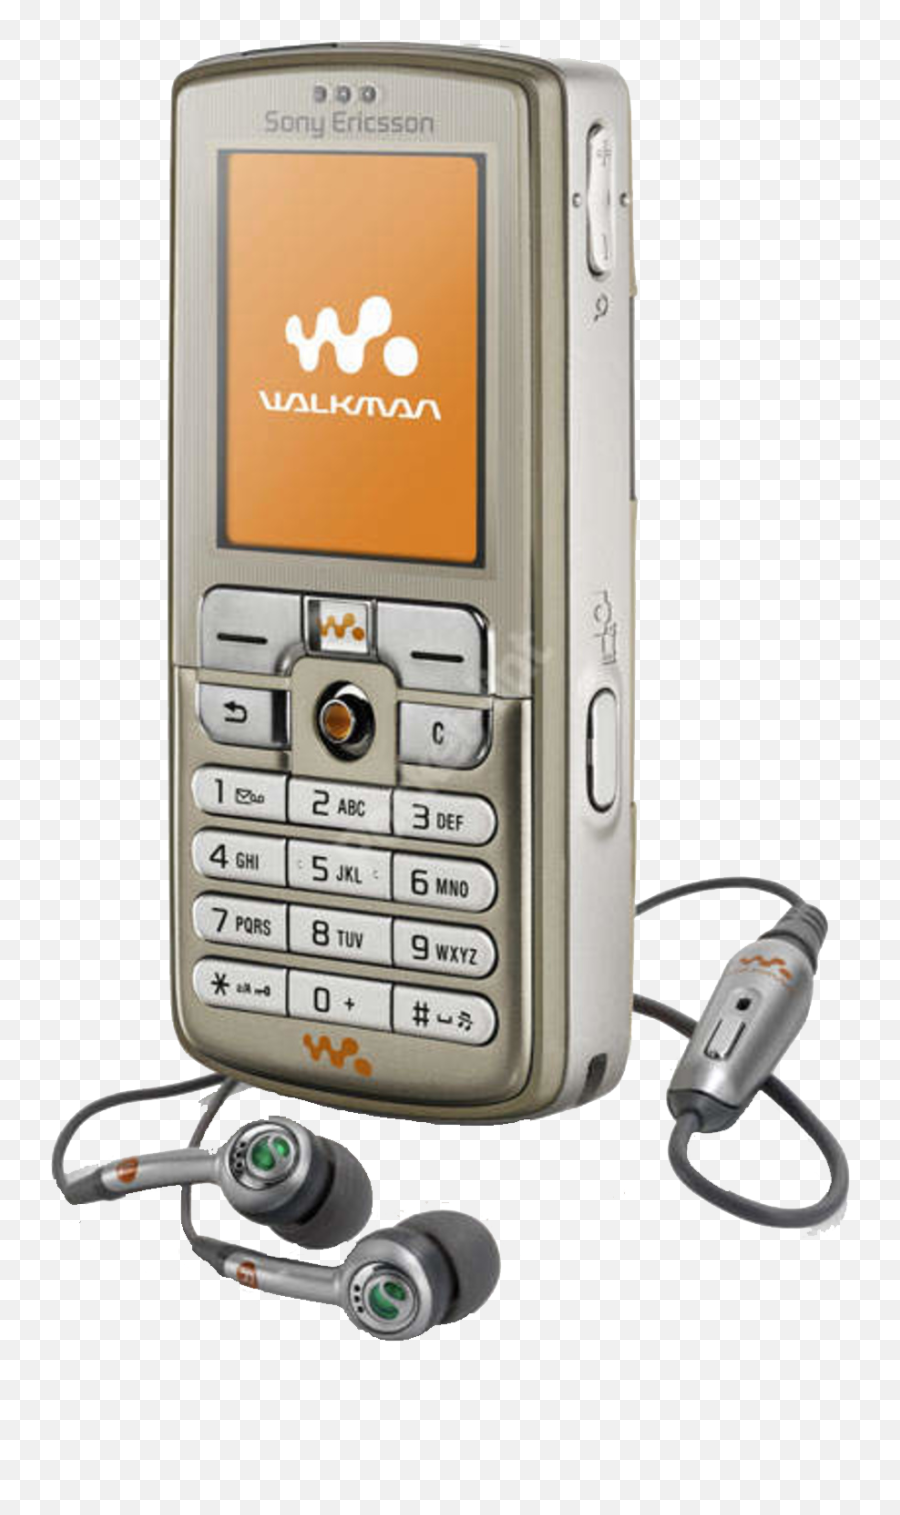 The Evolution Of Mobile Phones 1973 To 2019 - Flaunt Digital Sony Ericsson W700 Png,Changing The Icon Colors On My Samsung Galaxy 6 Phone